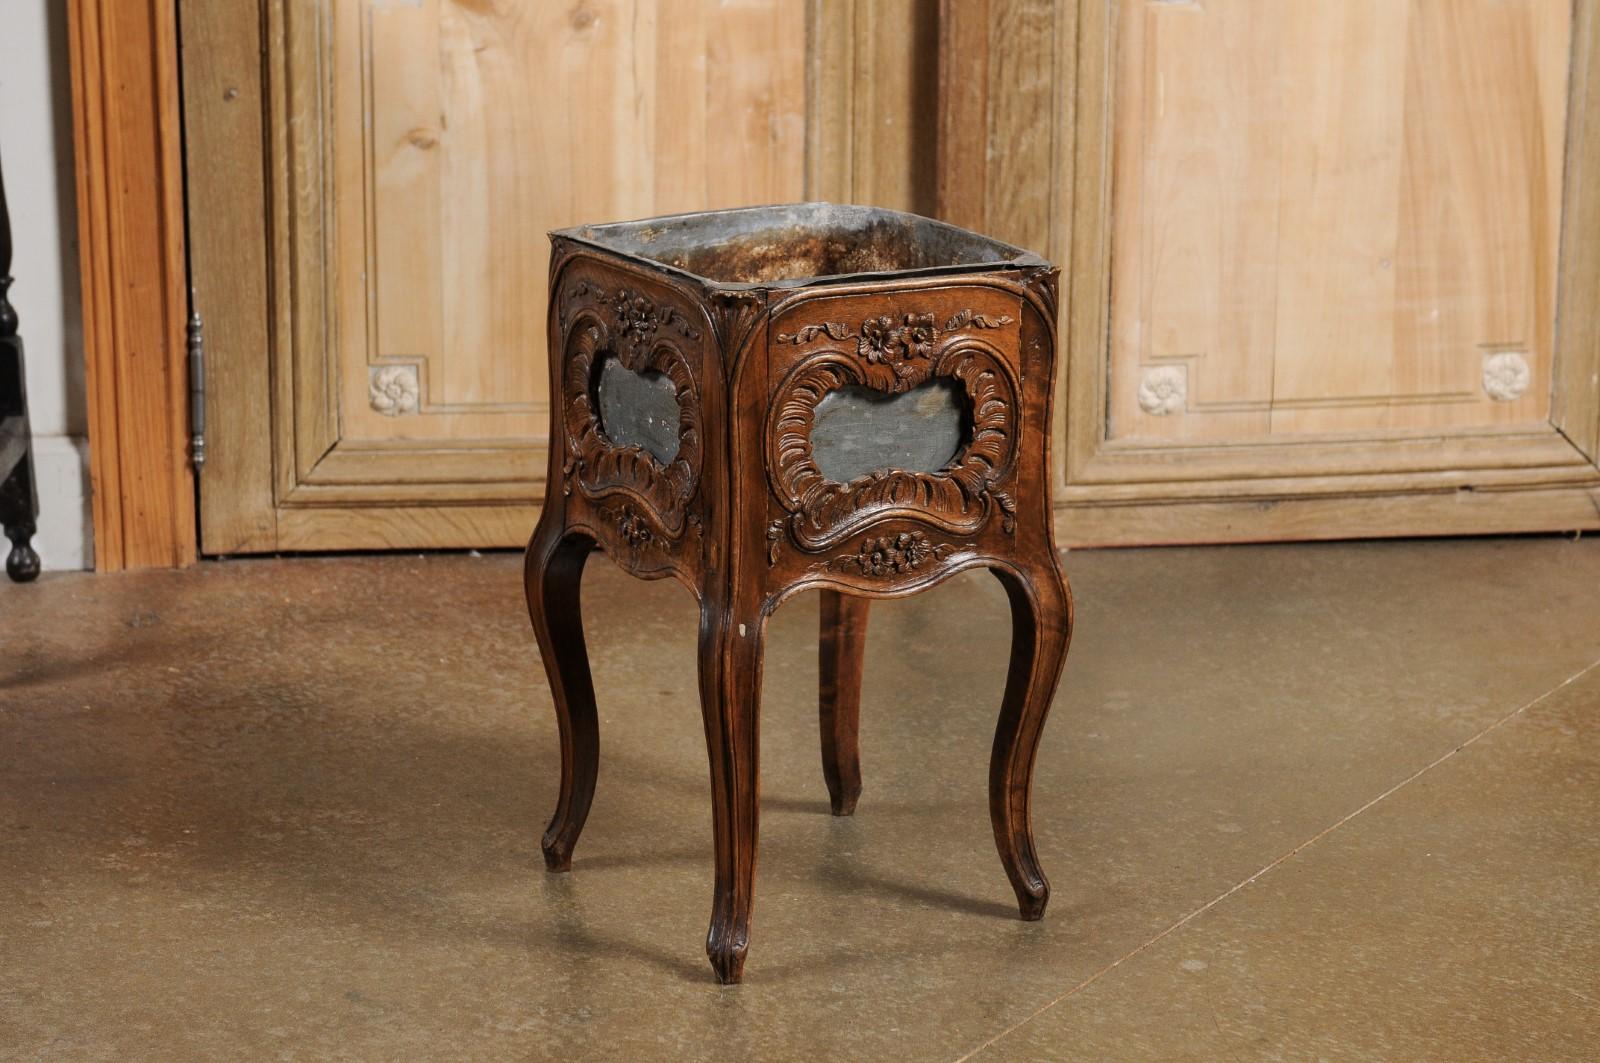 French 1890s Rococo Revival Walnut Planter with Rocailles and Floral Motifs For Sale 8